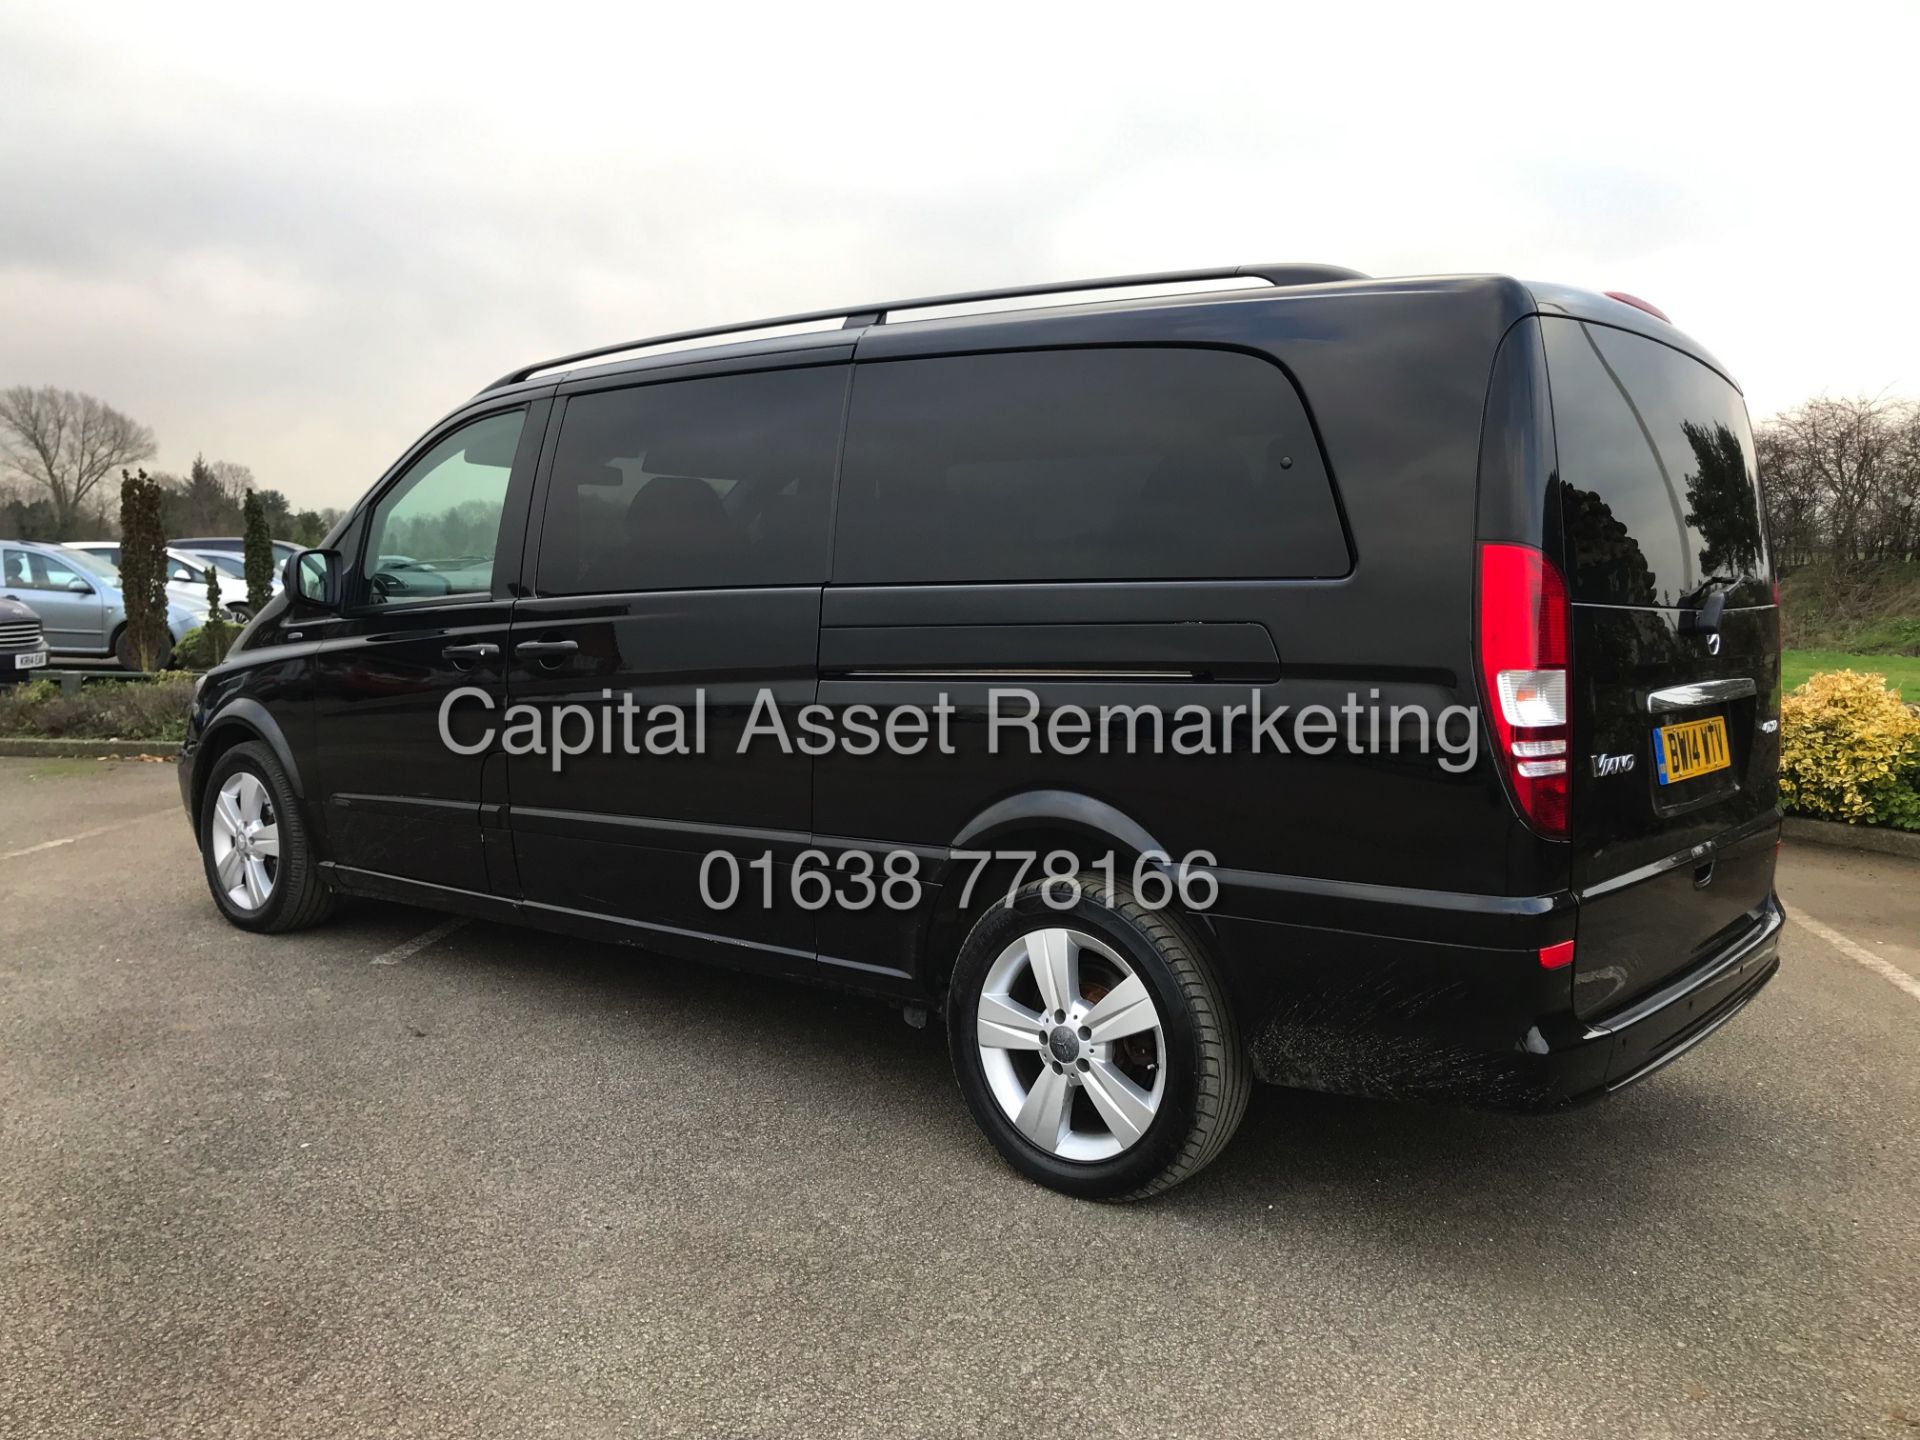 (ON SALE) MERCEDES VIANO 2.2CDI "AMBIENET" XLWB 8 SEATER (14 REG) 1 OWNER - FULLY LOADED - LEATHER - Image 3 of 28